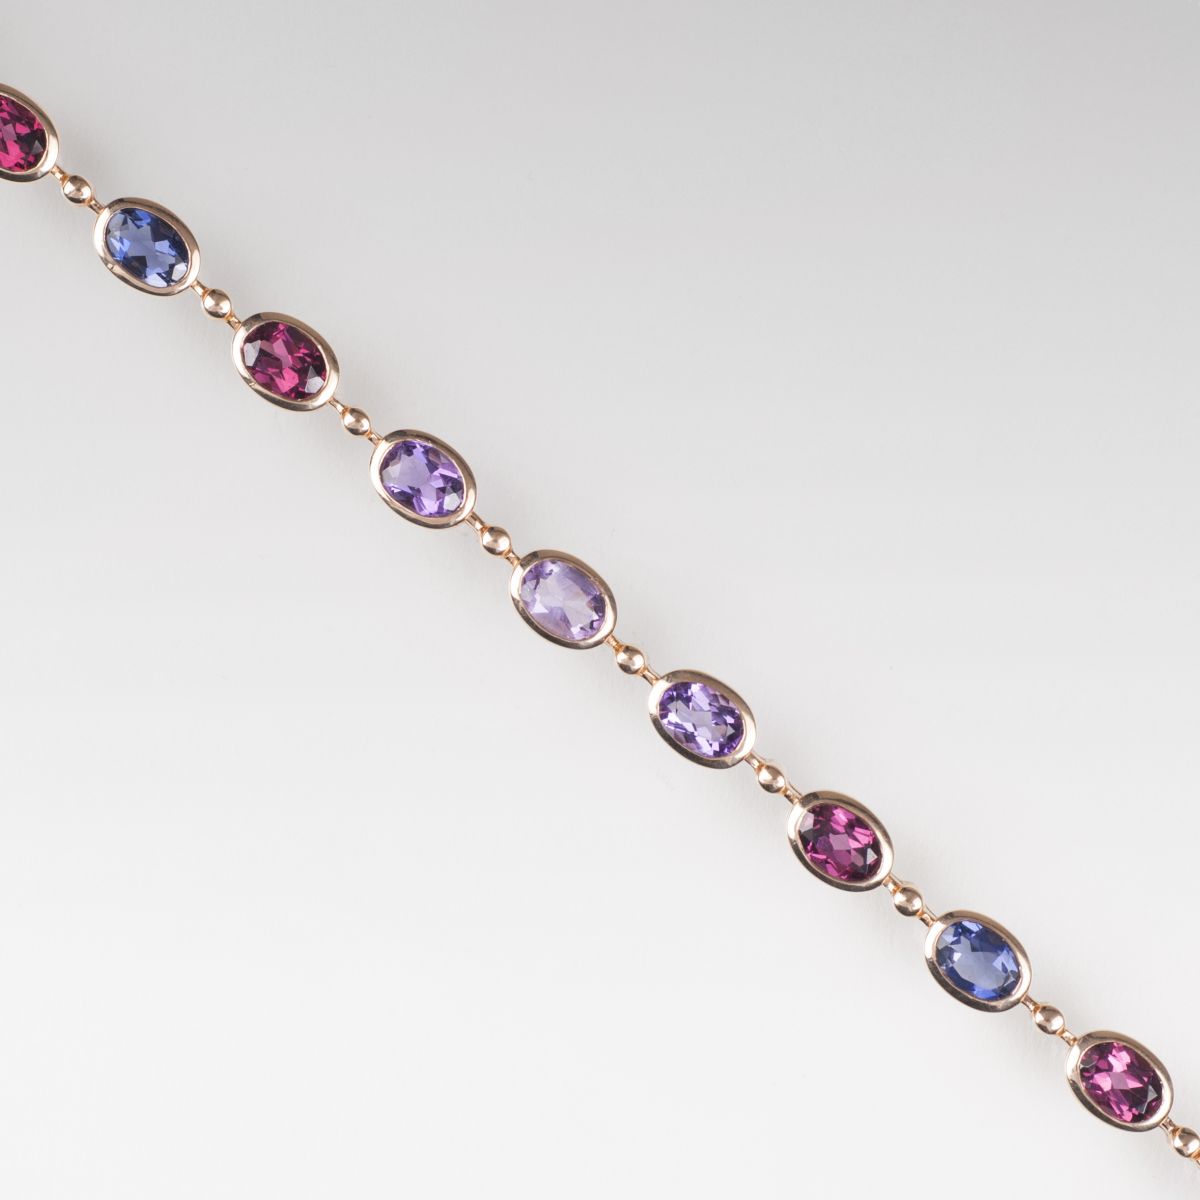 A bracelet with amethyst, rhodolith and iolith